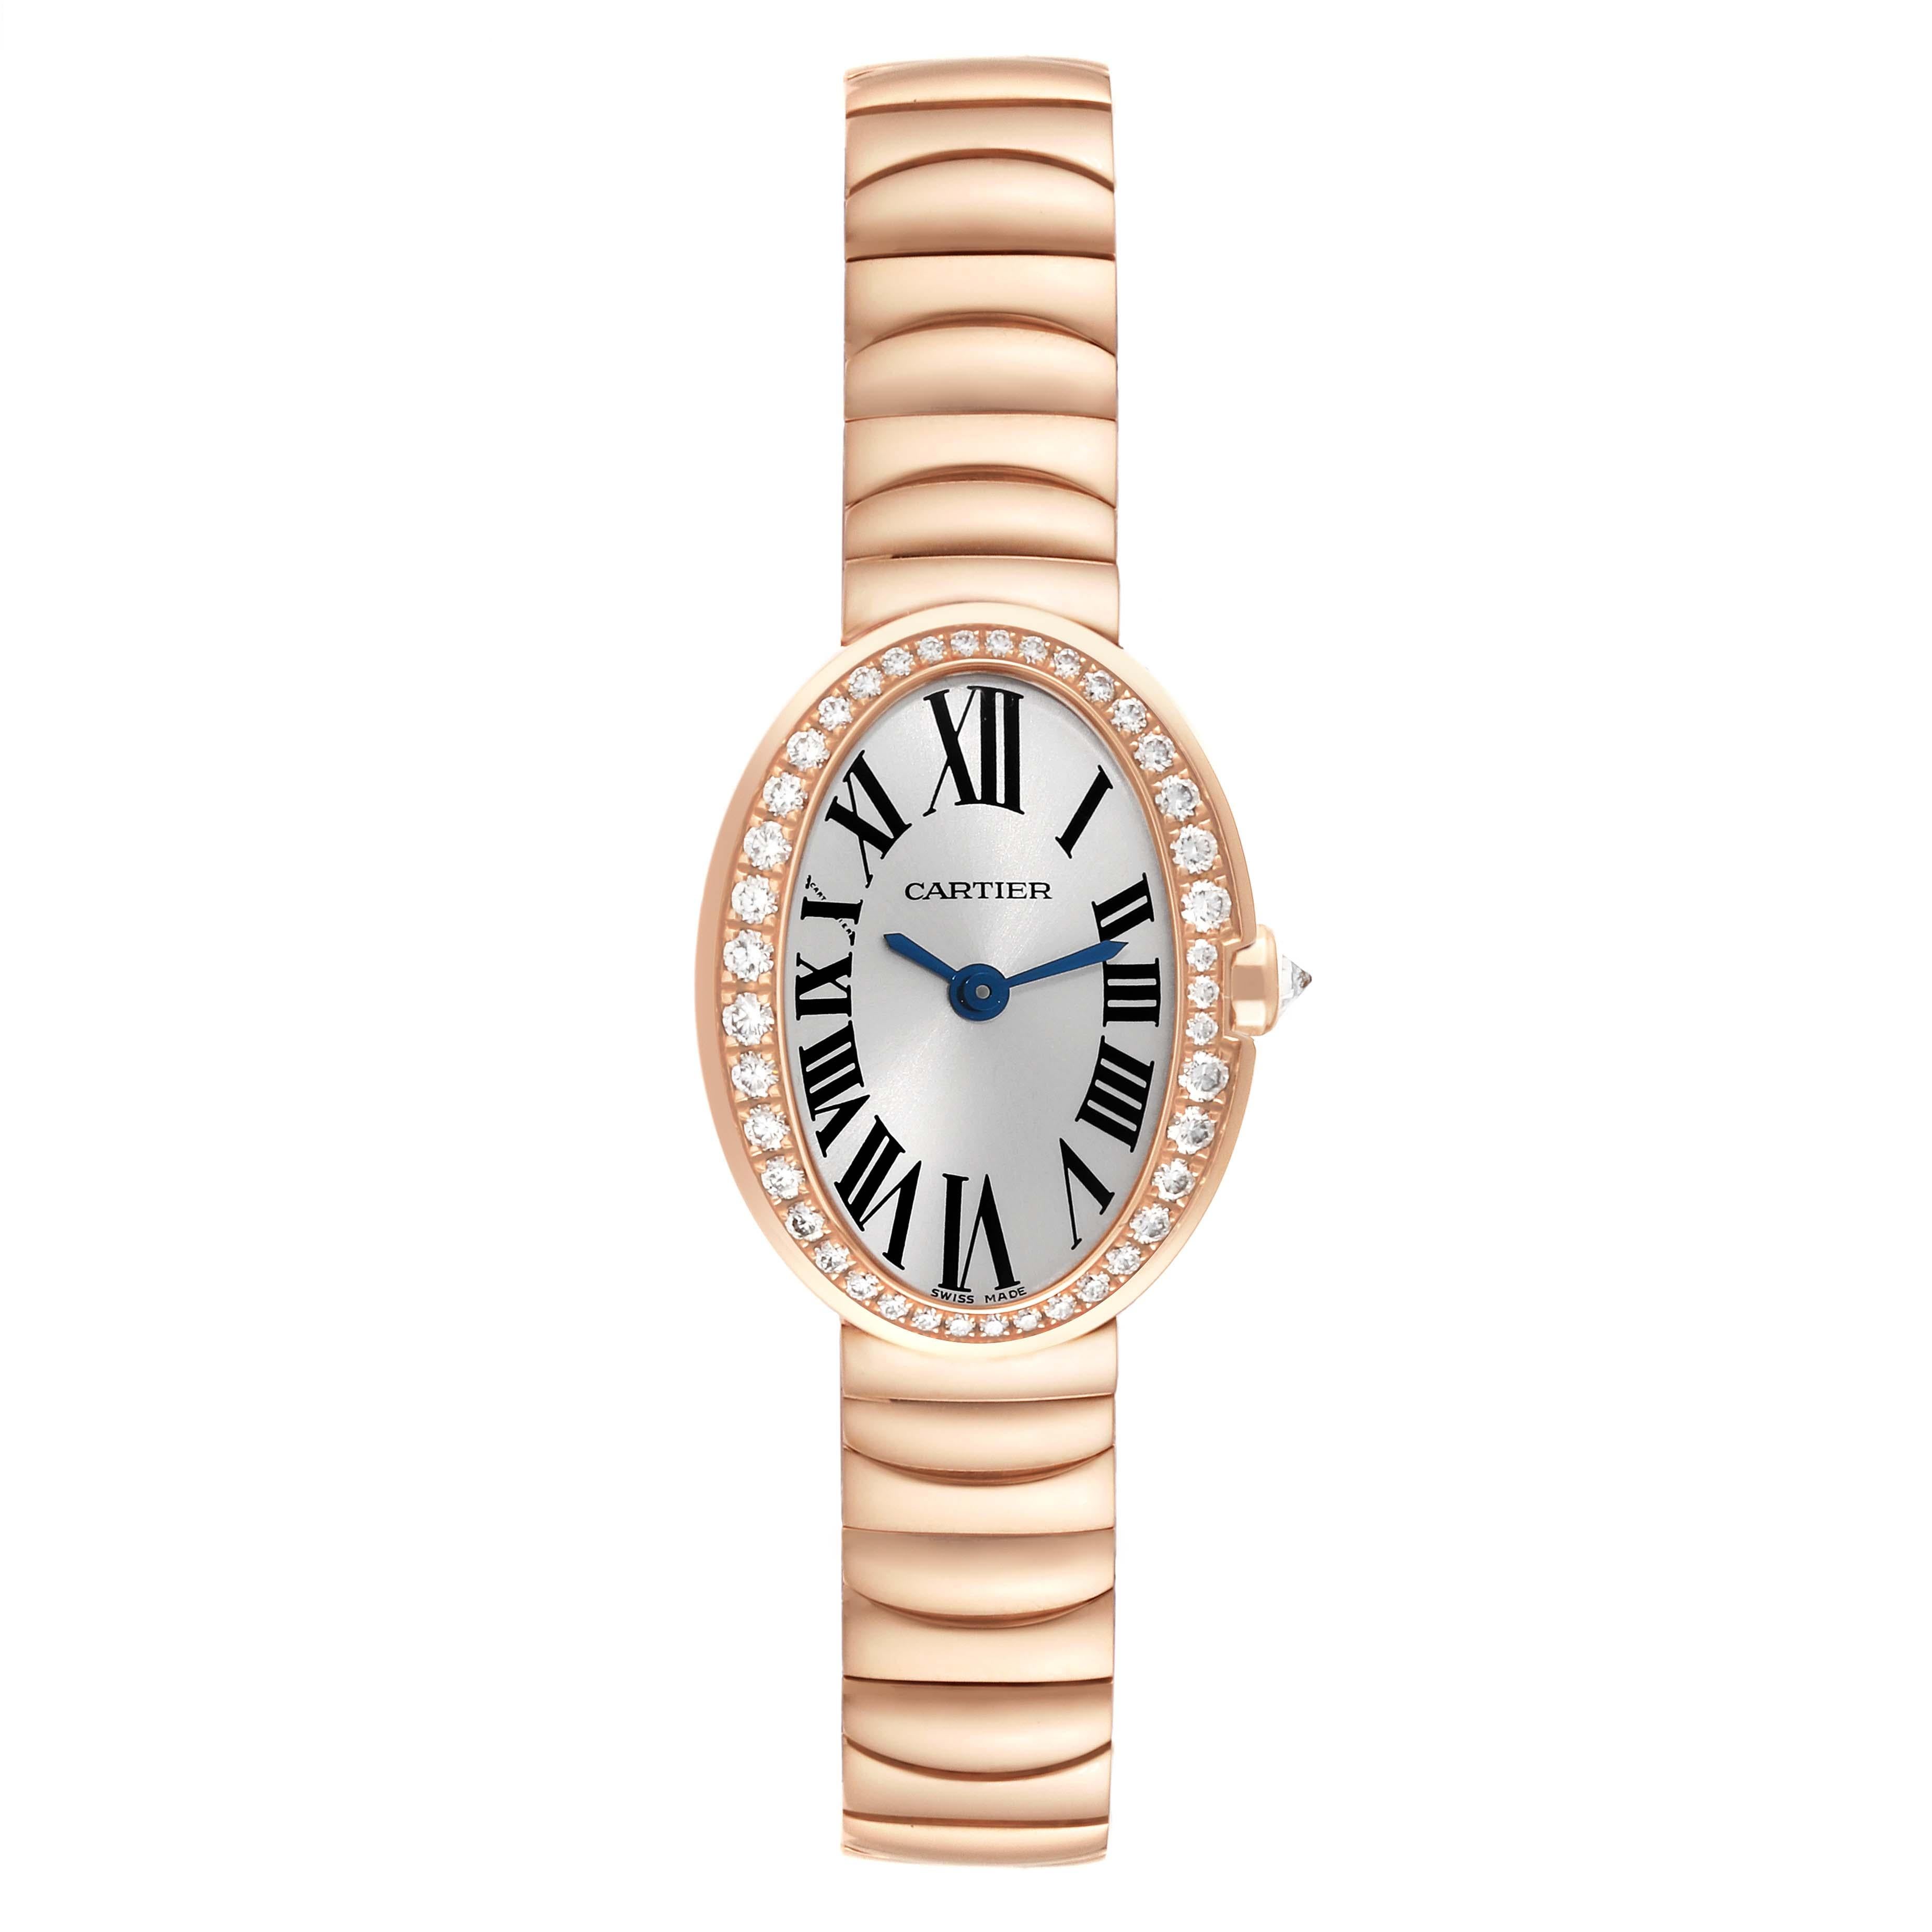 Cartier Mini Baignoire Rose Gold Diamond Ladies Watch WB520026. Quartz movement. 18k rose gold oval case 25.3 mm x 18.71 mm. Case thickness: 6.82 mm. The crown is set with an original Cartier factory diamond. 18k rose gold original Cartier factory